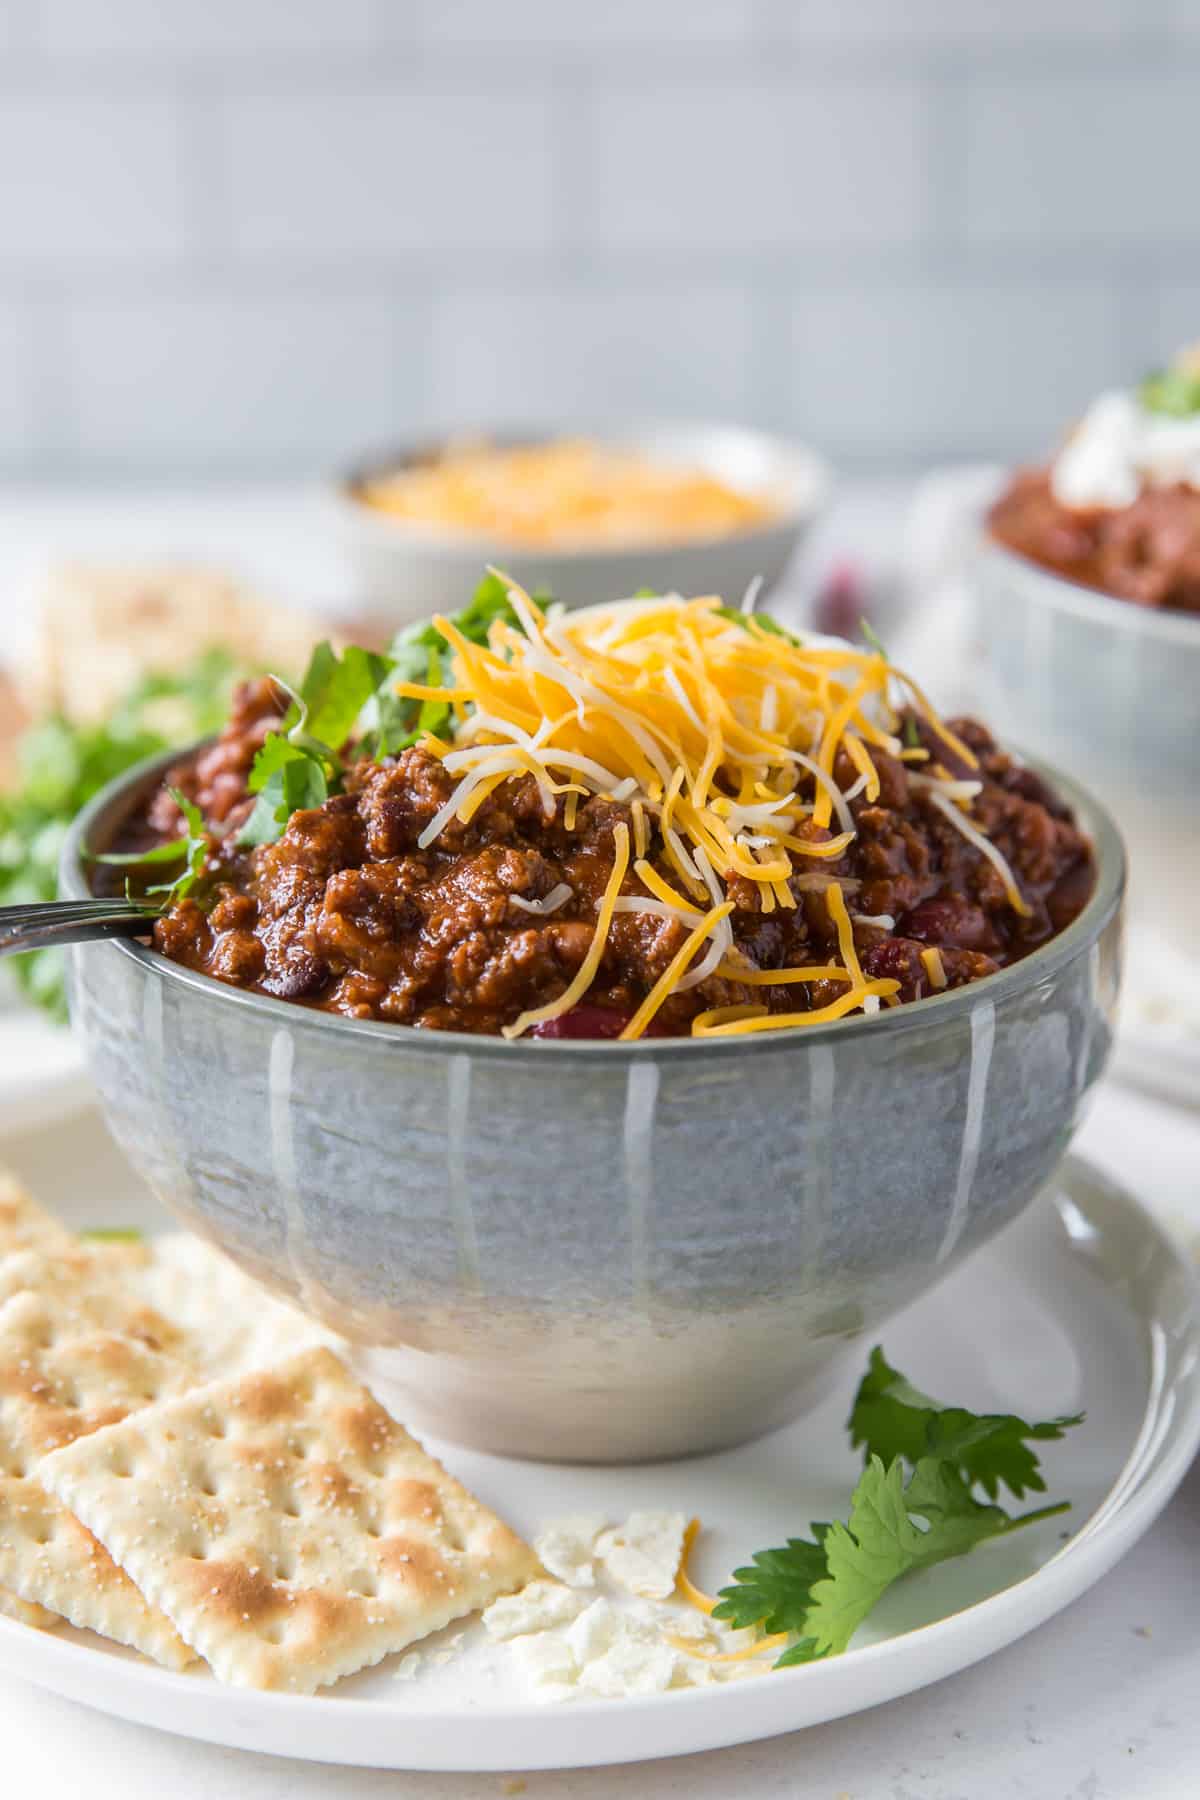 A bowl of chili on a plate with saltine crackers.